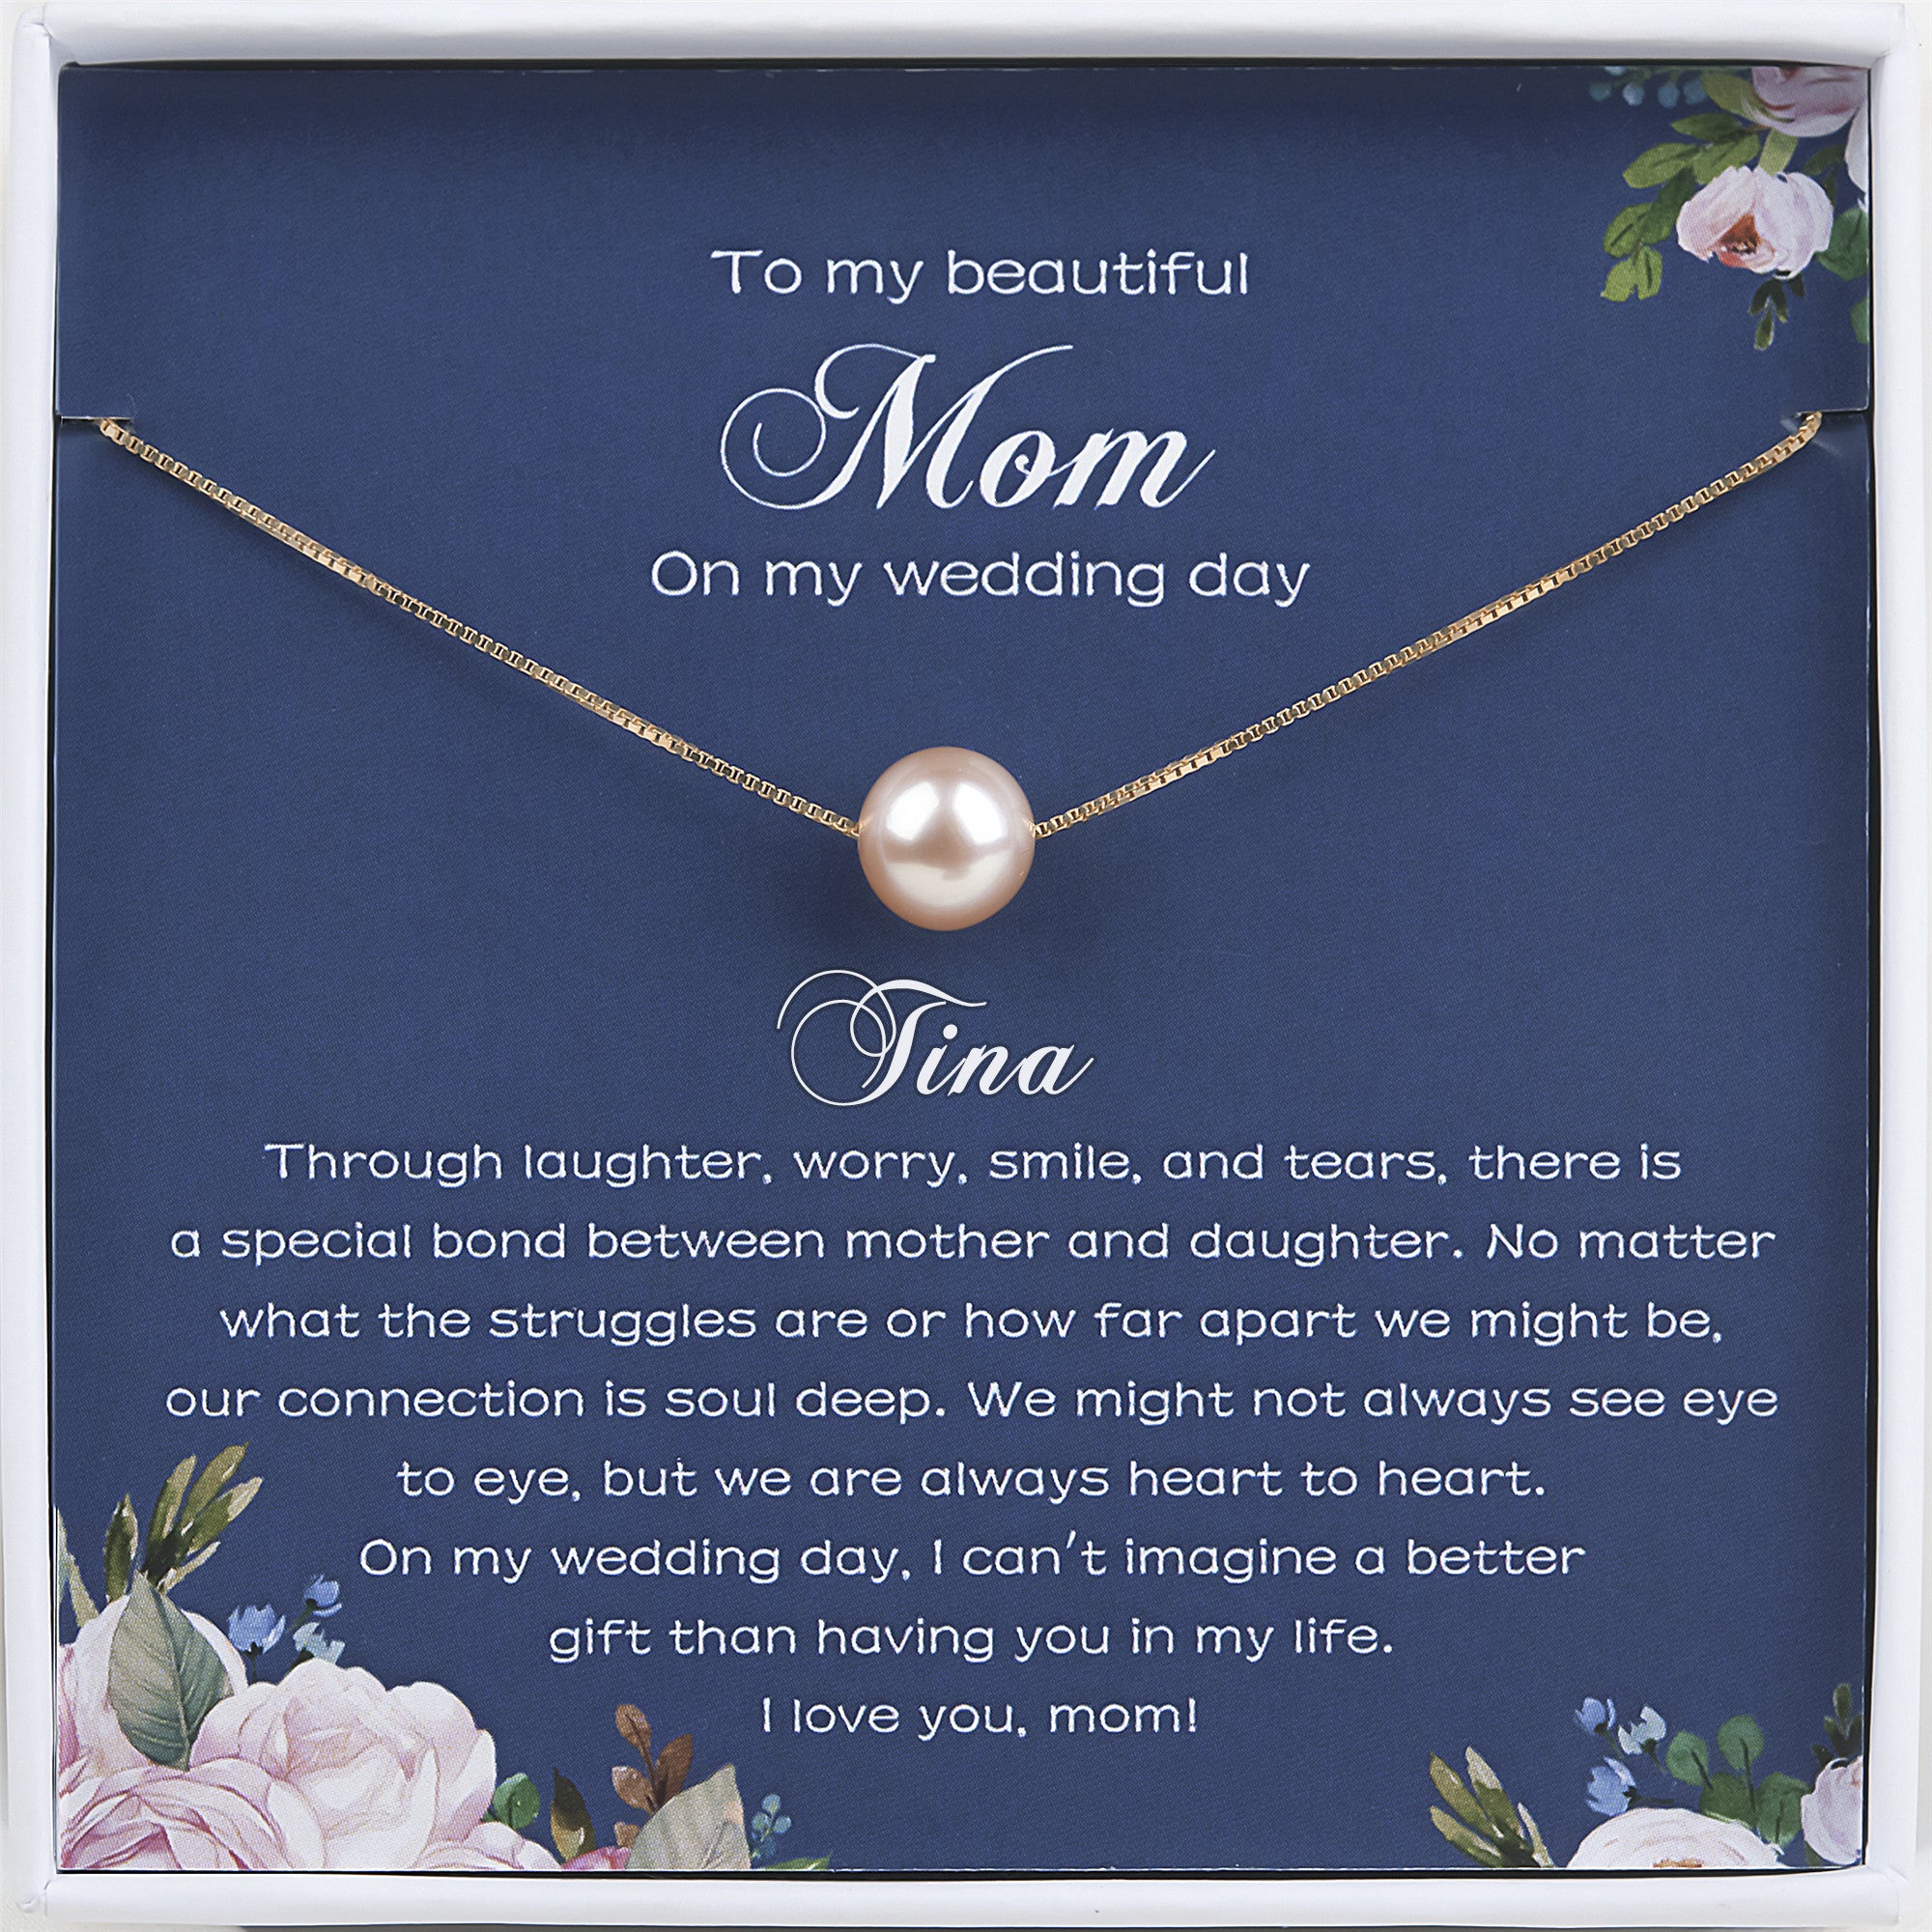 Friend to Bride Necklace Gift with Message Card, on Her Wedding Day, F – AZ  Family Gifts